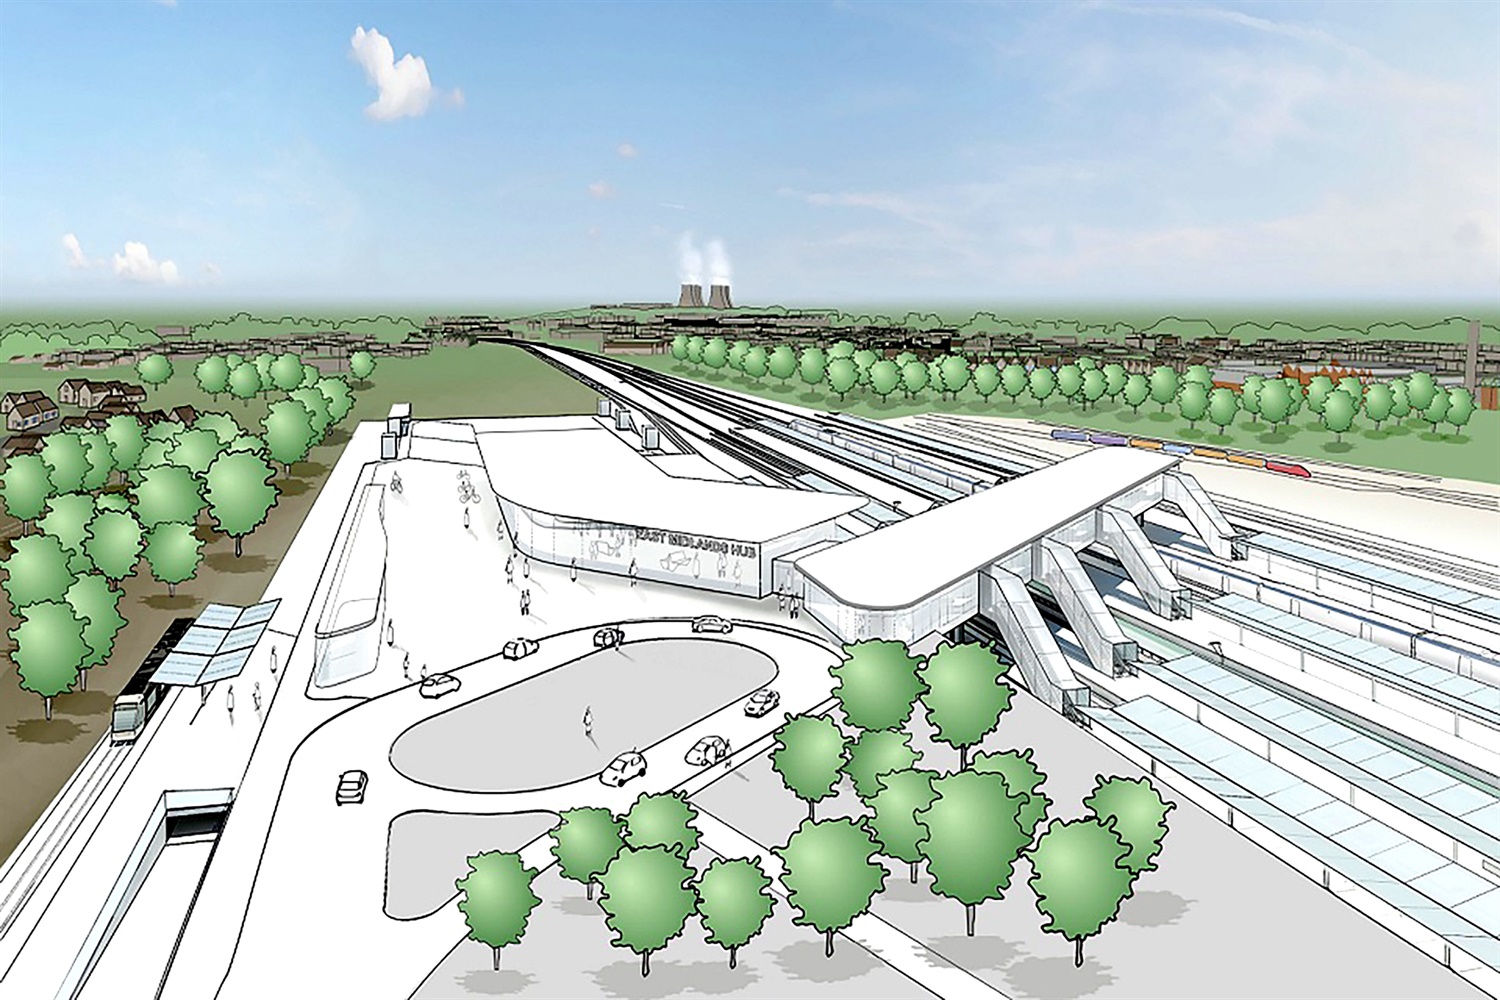 DfT deal means East Midlands HS2 station could open early